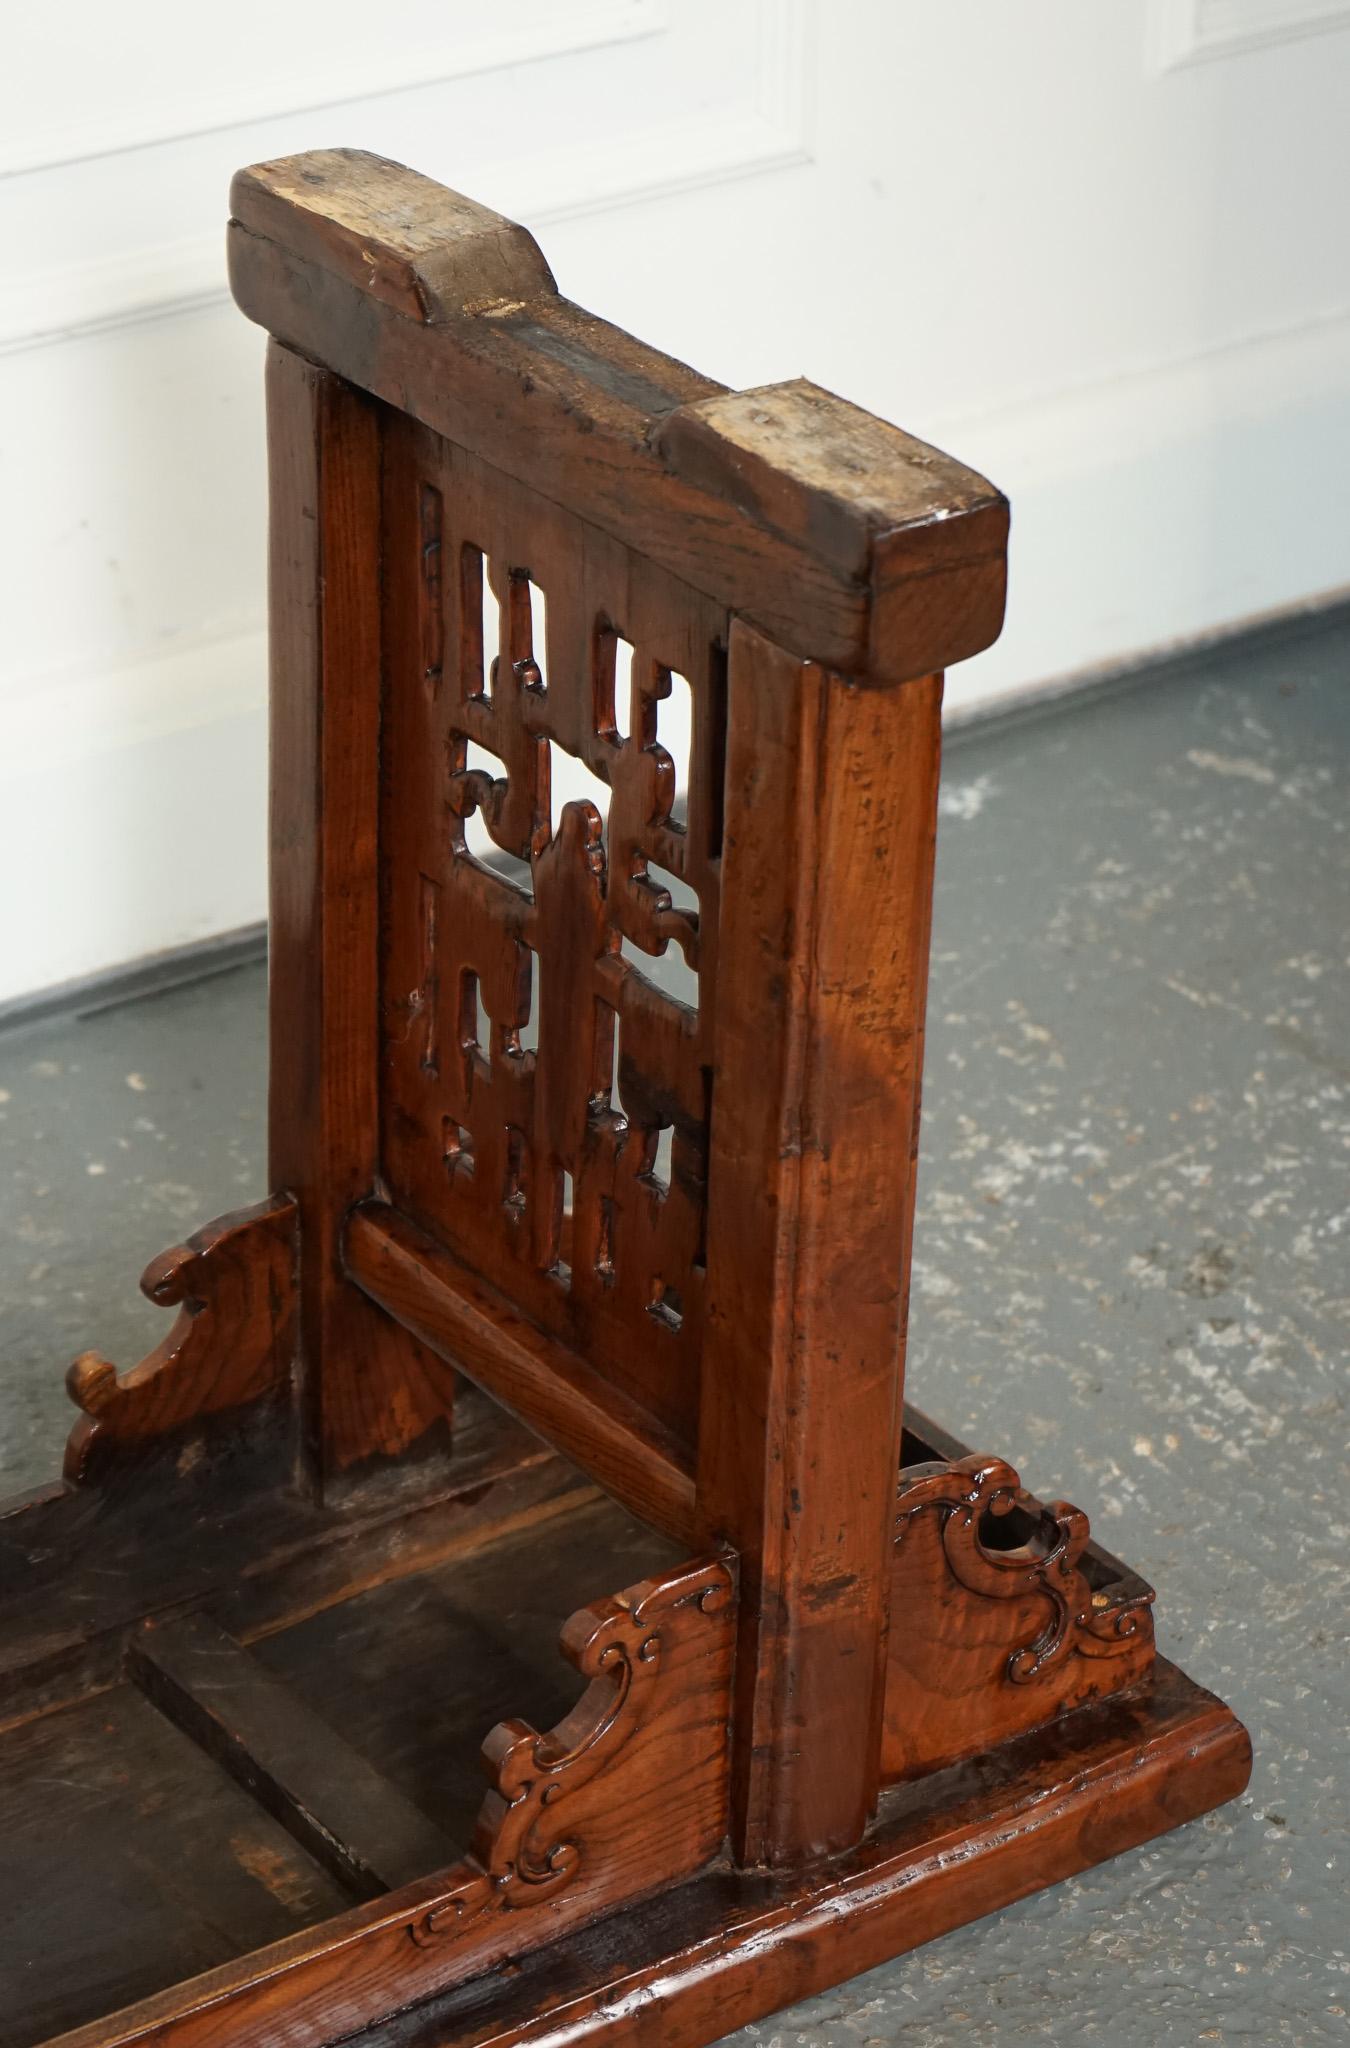 
We are delighted to offer for sale this Lovely Late 19th-century Chinese Altar Made From Elm Wood.

 A piece that exudes both historical charm and practical functionality. This versatile item, originally designed as an altar for religious or